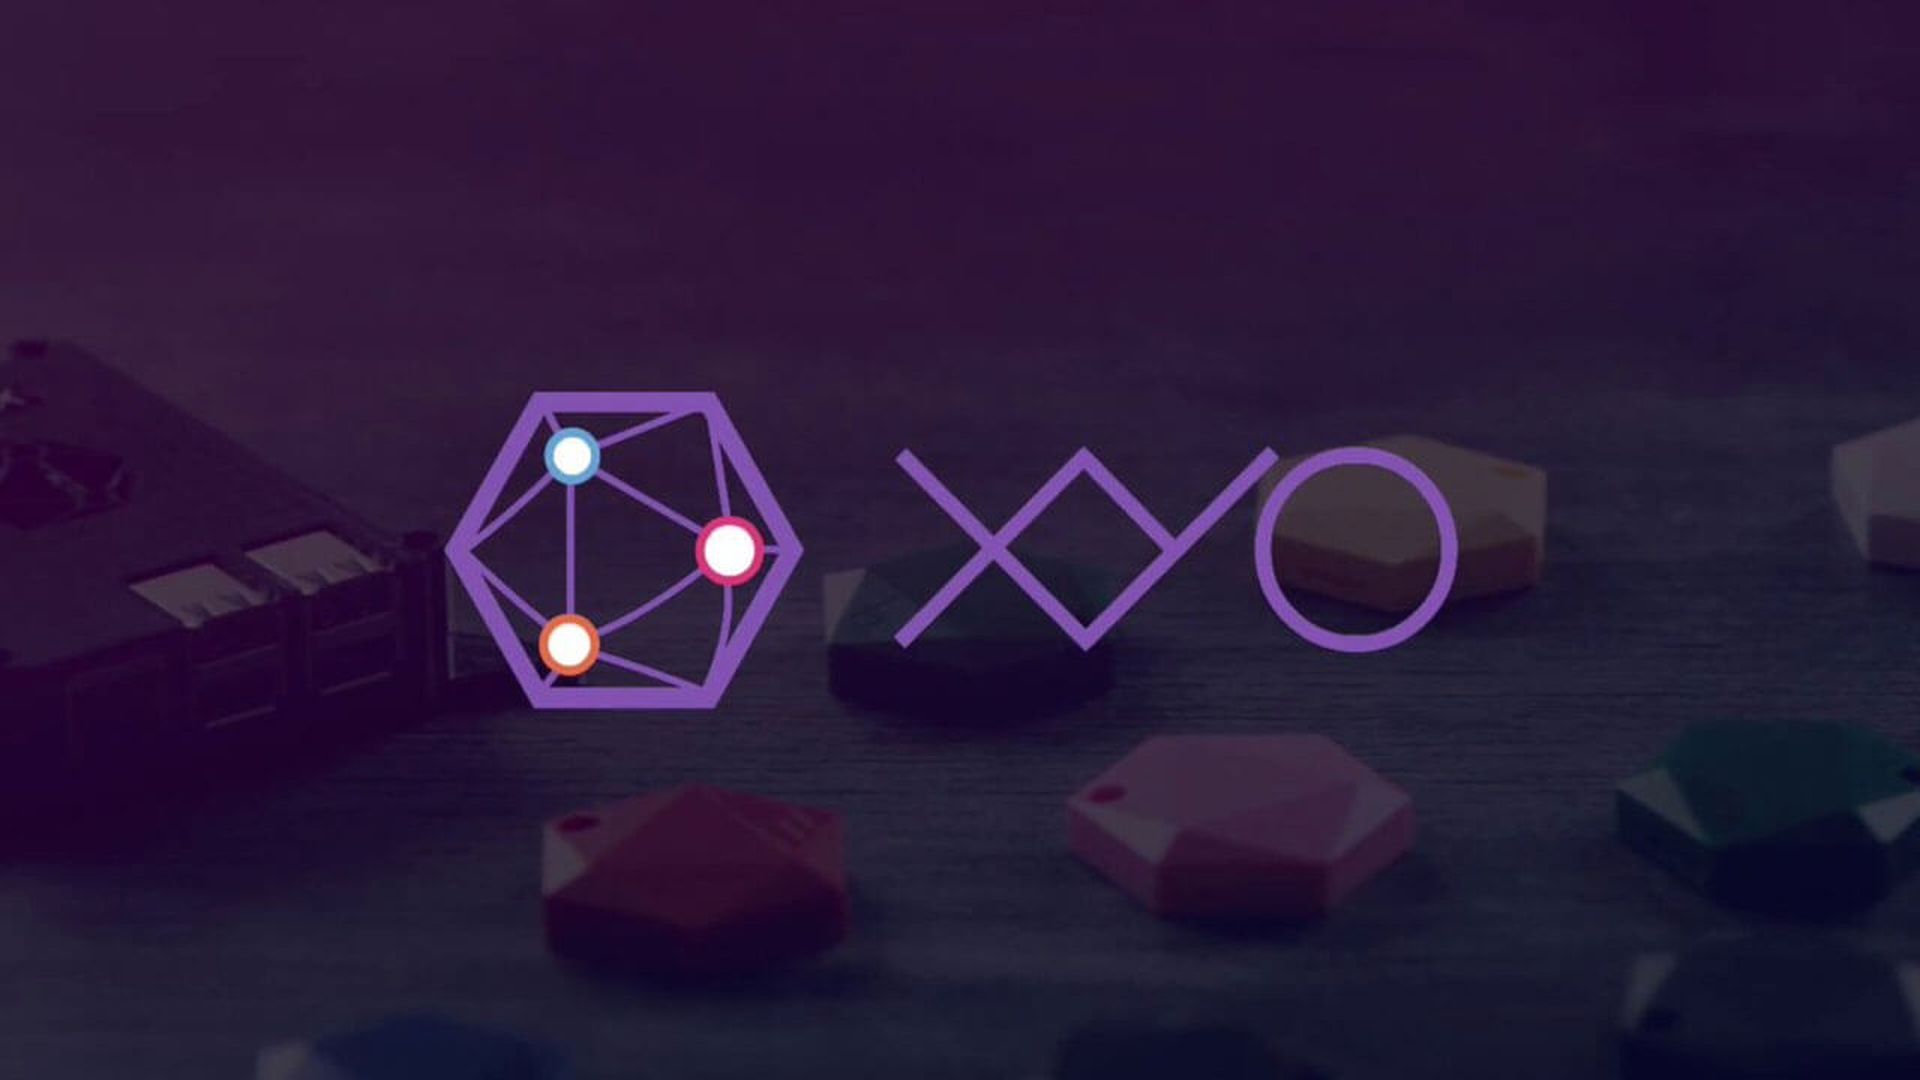 Today, we are going to be covering the XYO crypto, how to buy it, what it has to offer in real-world implementation, and a price prediction up to 2031.